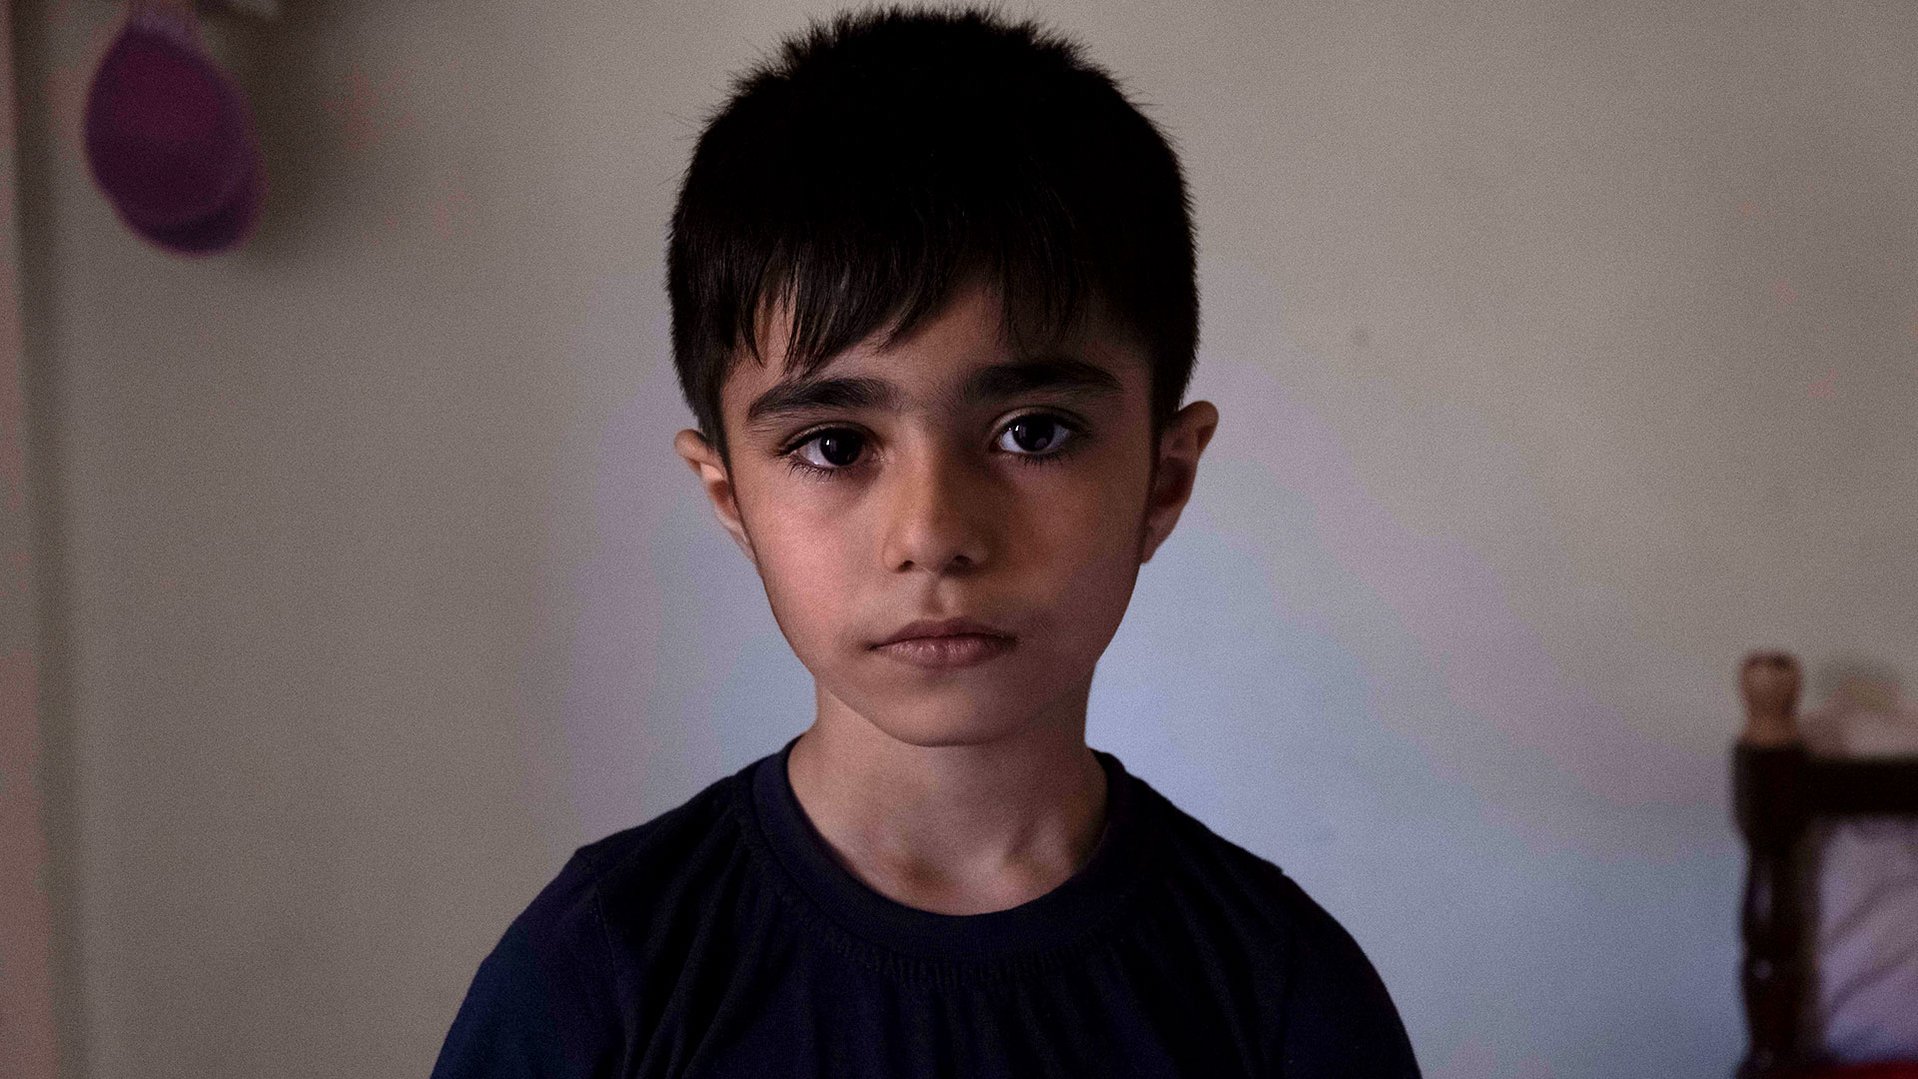 Adil fled his homecountry Syria when he was only four years old